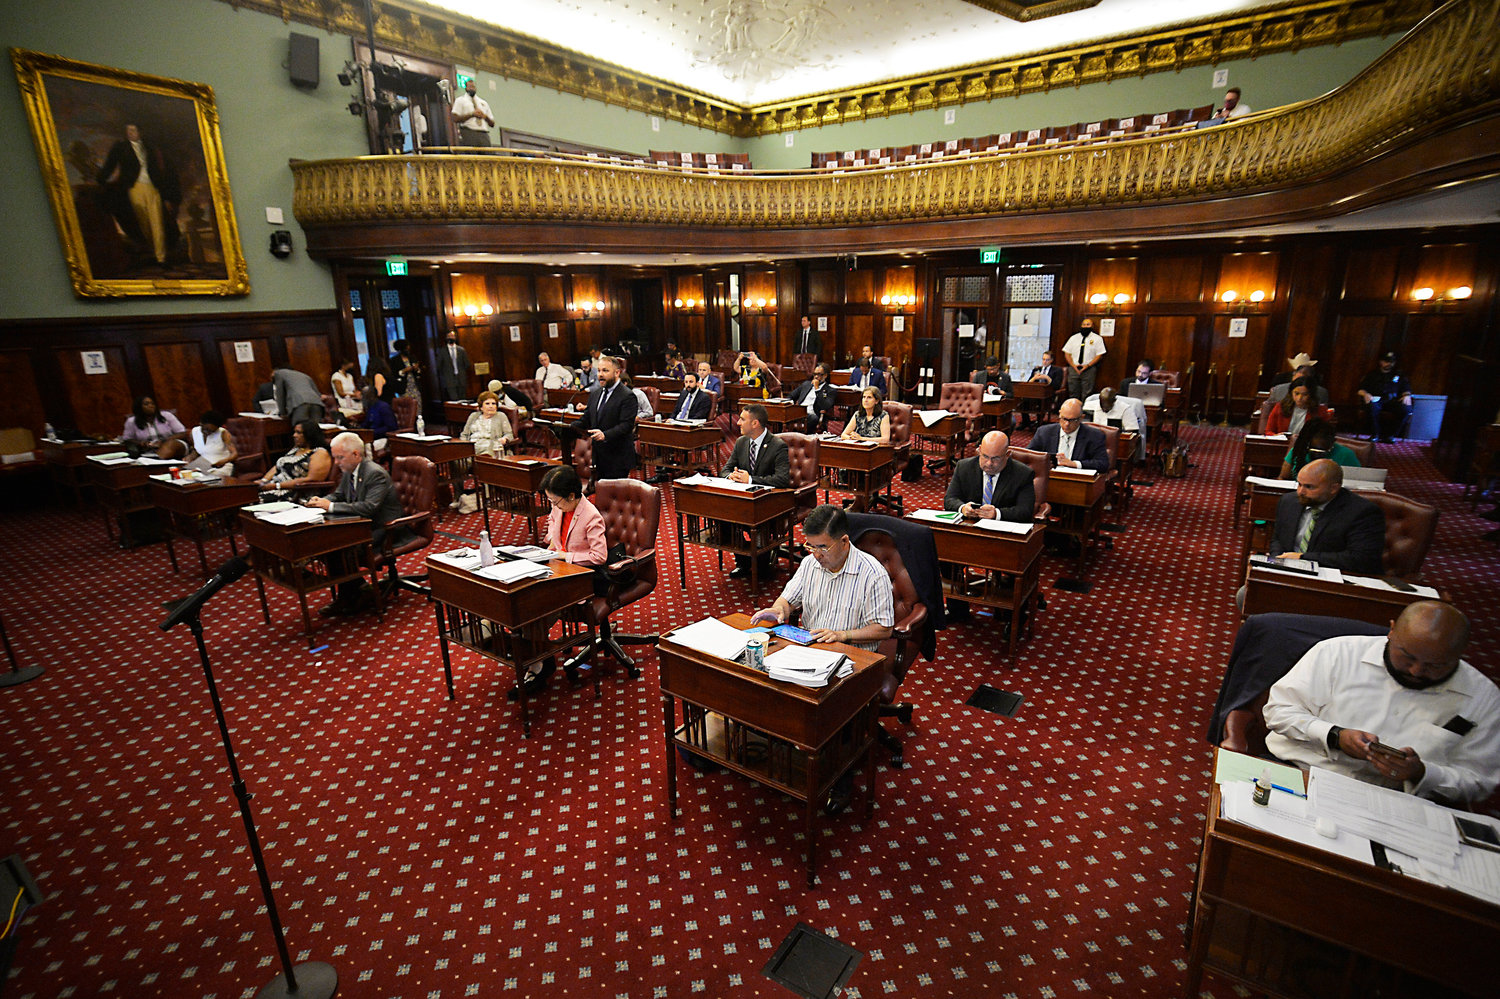 The city council passed a $99 billion budget late last month, the biggest in the city’s history. Councilman Eric Dinowitz joined his colleagues in the council chamber for the body’s first in-person vote since the coronavirus pandemic forced all proceedings online last year.